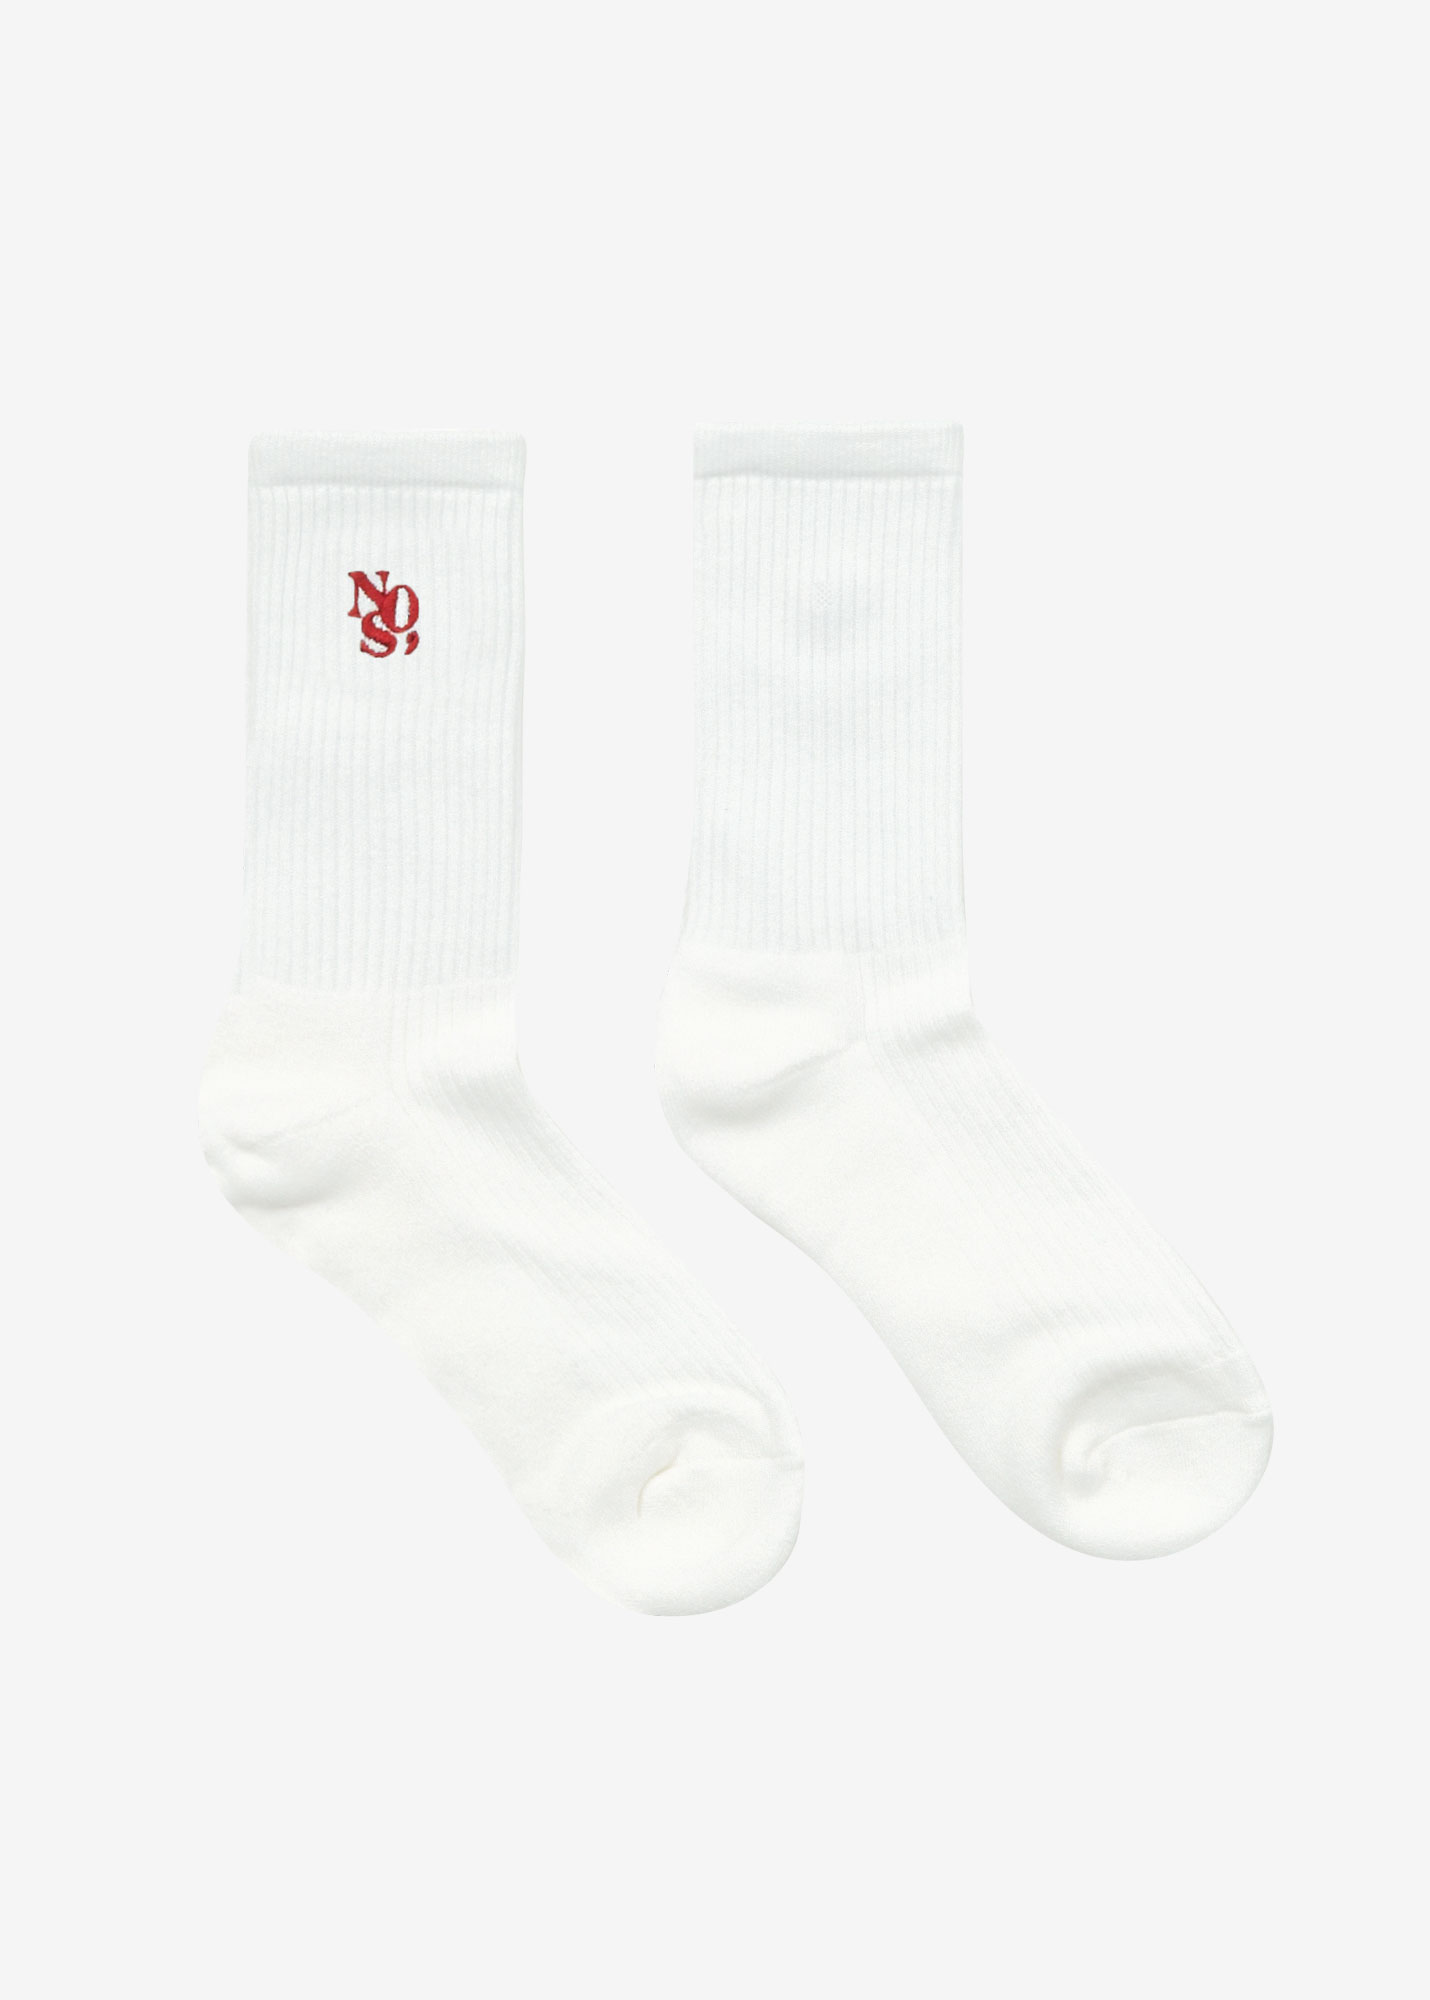 NOS7 Embroidered Socks - Red